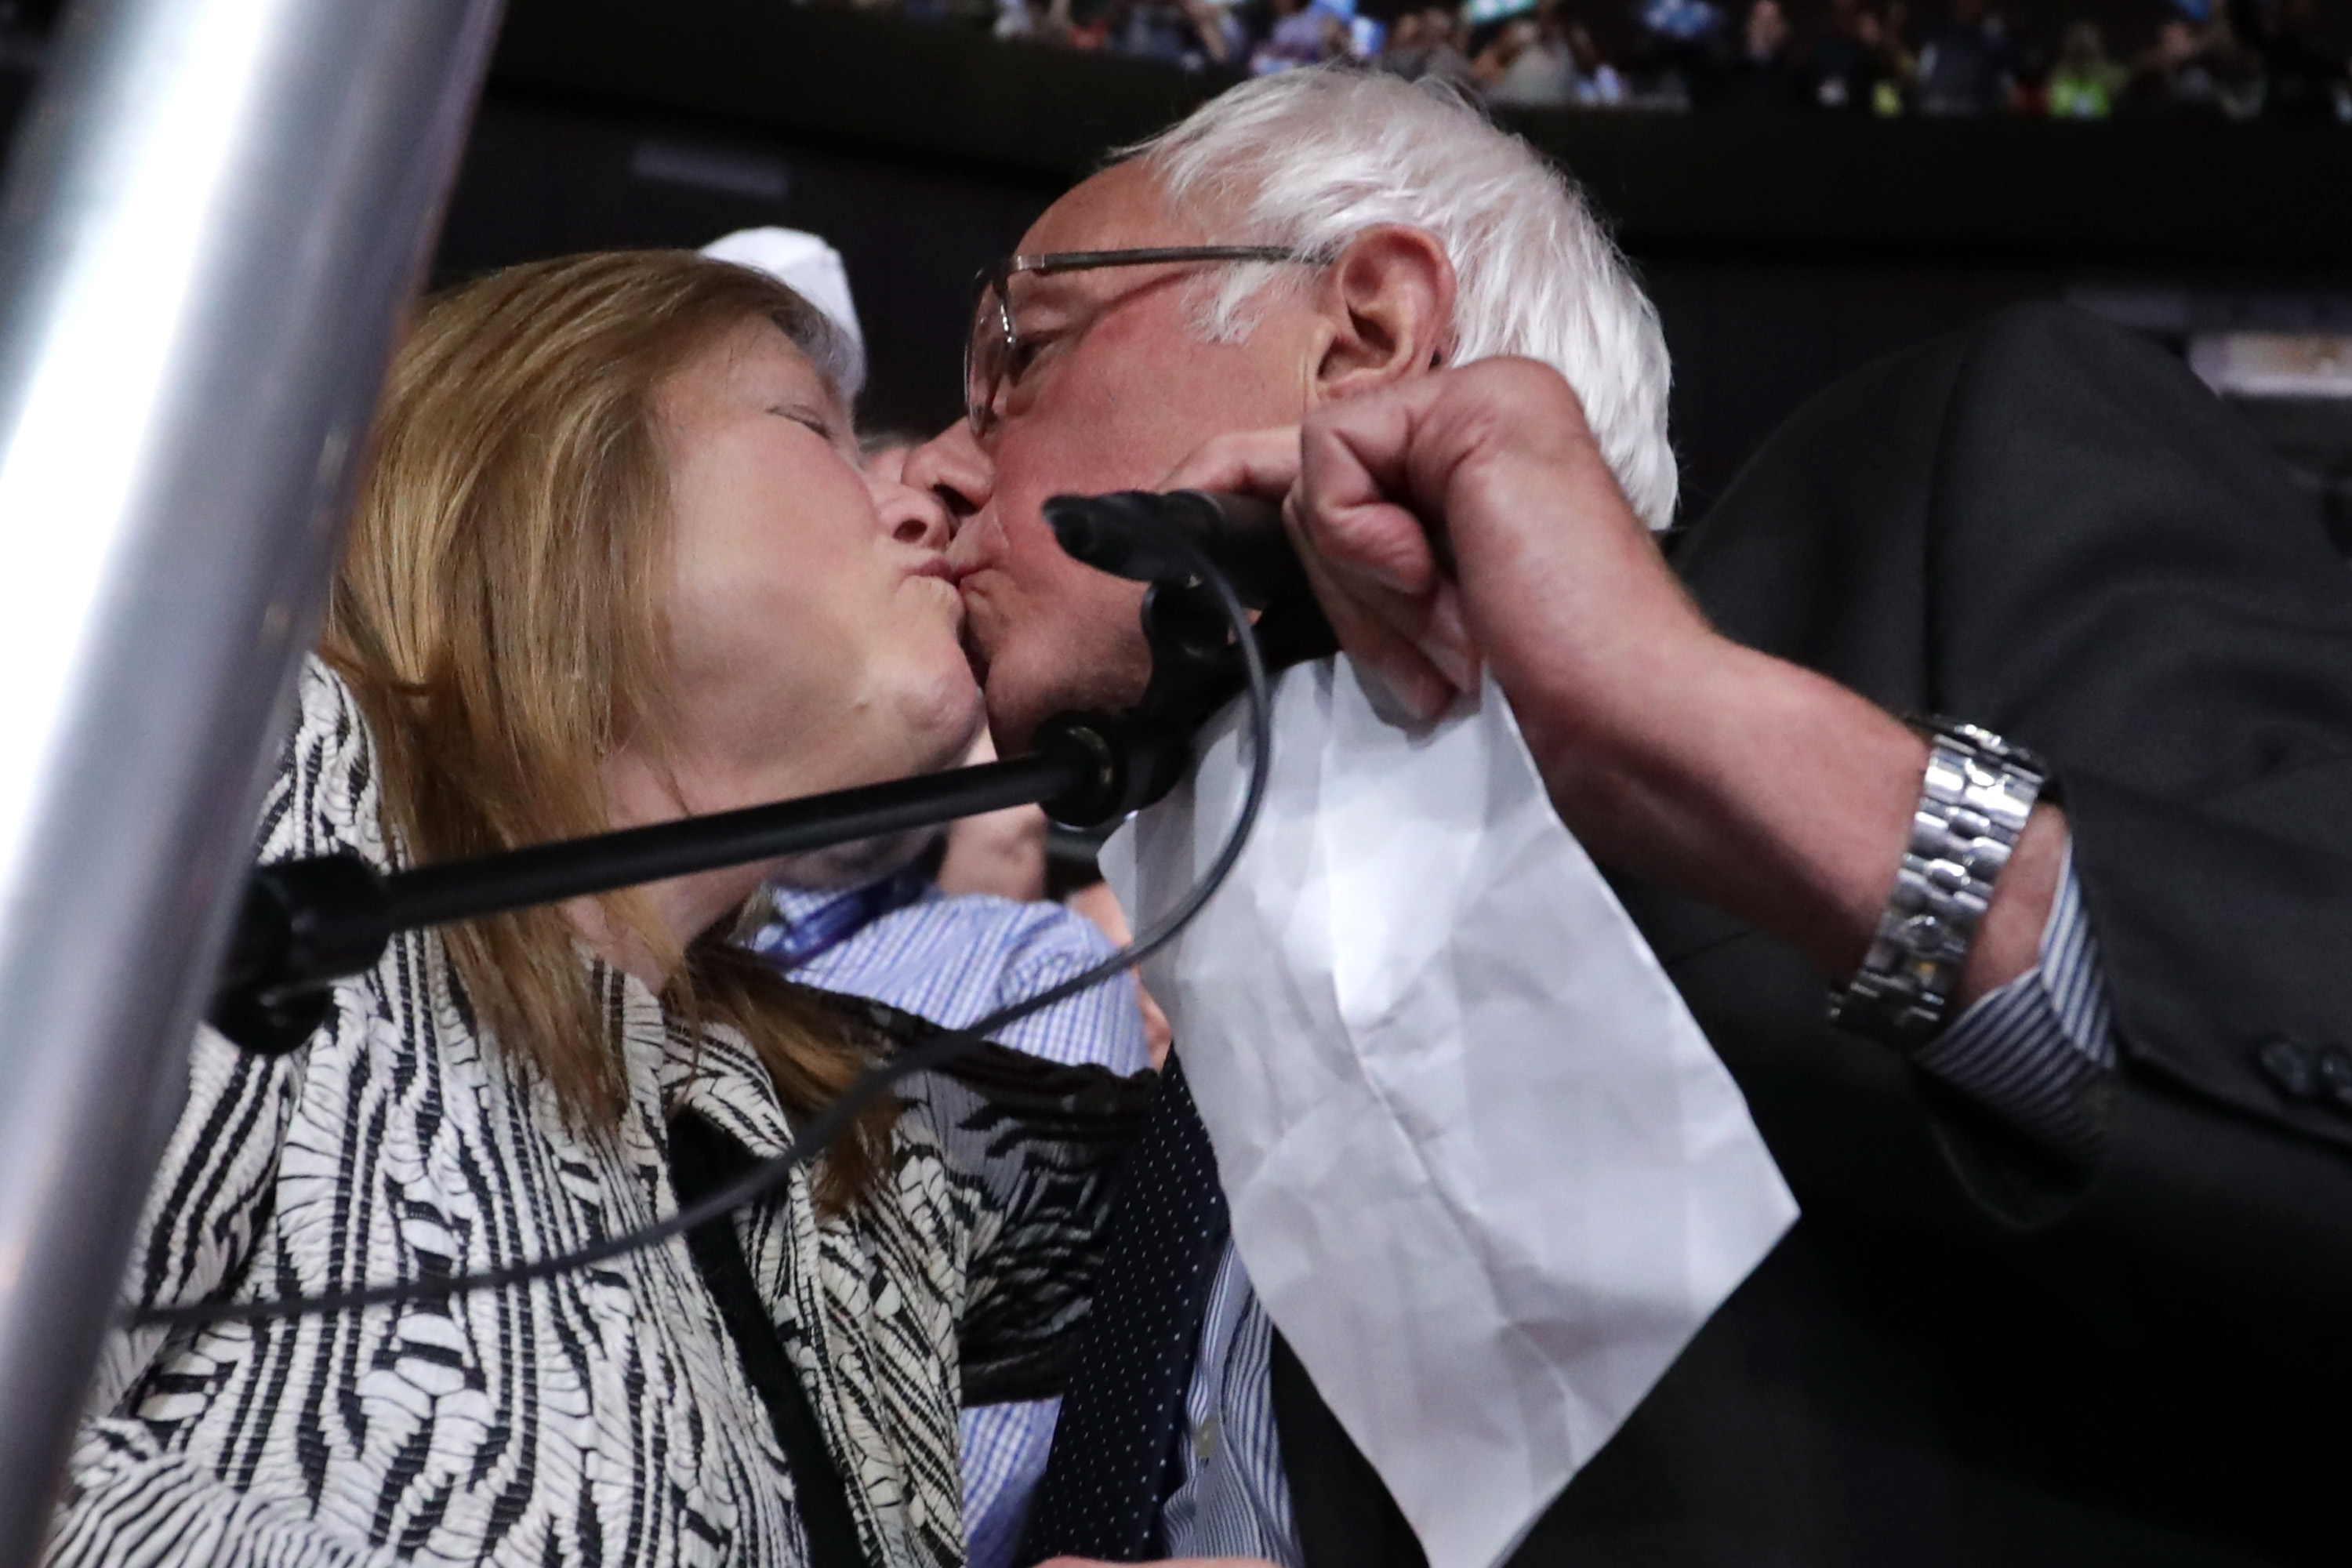 PHILADELPHIA, PA - JULY 26: Sen. Bernie Sanders kisses his wife Jane O'Meara Sanders after the Vermont delegation cast their votes during roll call on the second day of the Democratic National Convention at the Wells Fargo Center, July 26, 2016 in Philadelphia, Pennsylvania. Democratic presidential candidate Hillary Clinton received the number of votes needed to secure the party's nomination. An estimated 50,000 people are expected in Philadelphia, including hundreds of protesters and members of the media. The four-day Democratic National Convention kicked off July 25. (Photo by Chip Somodevilla/Getty Images)